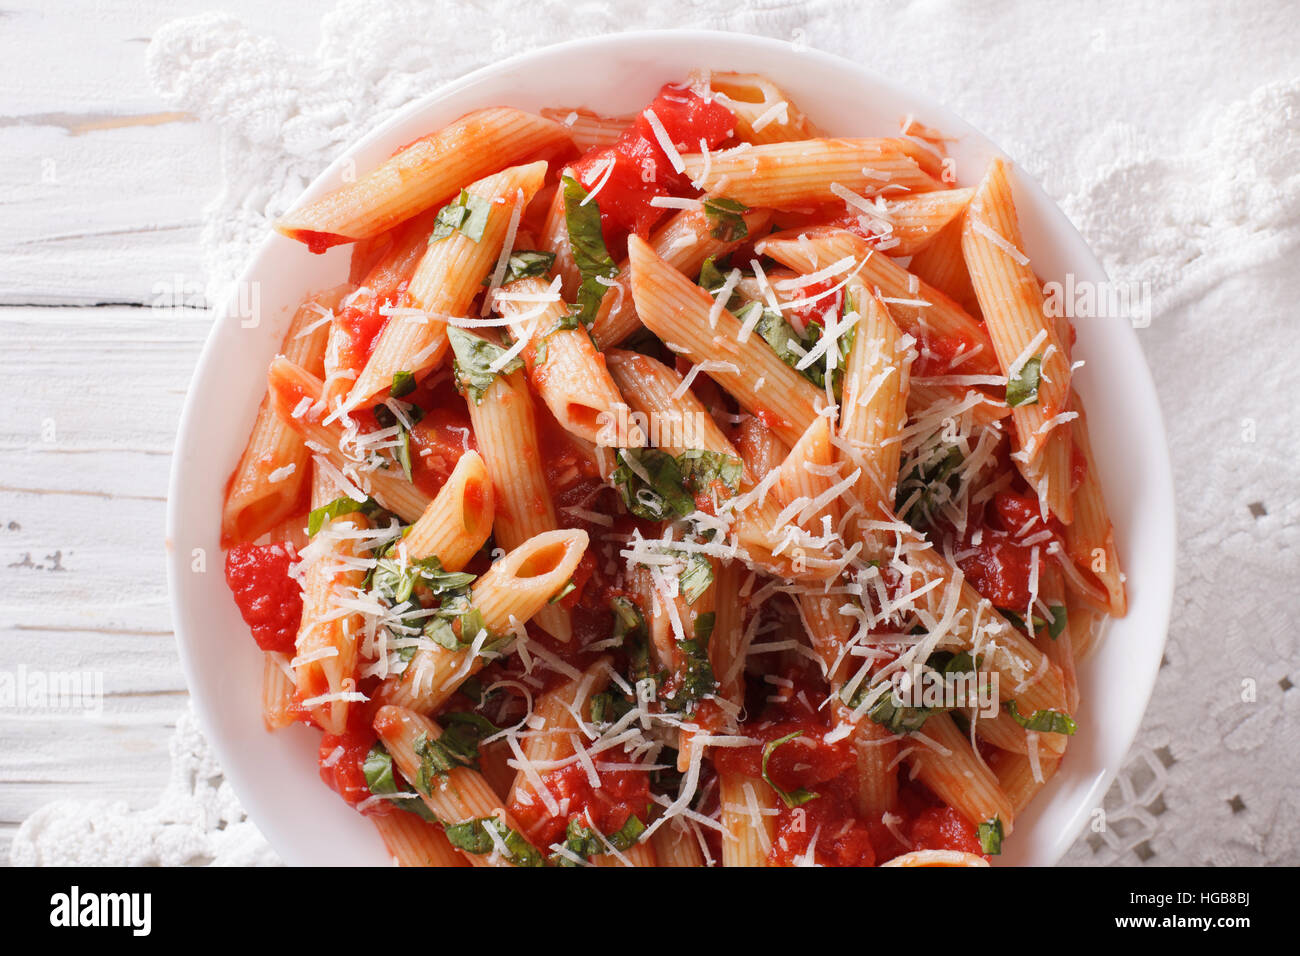 Page 2 - Arrabiata Pasta Plate High Resolution Stock Photography and Images  - Alamy